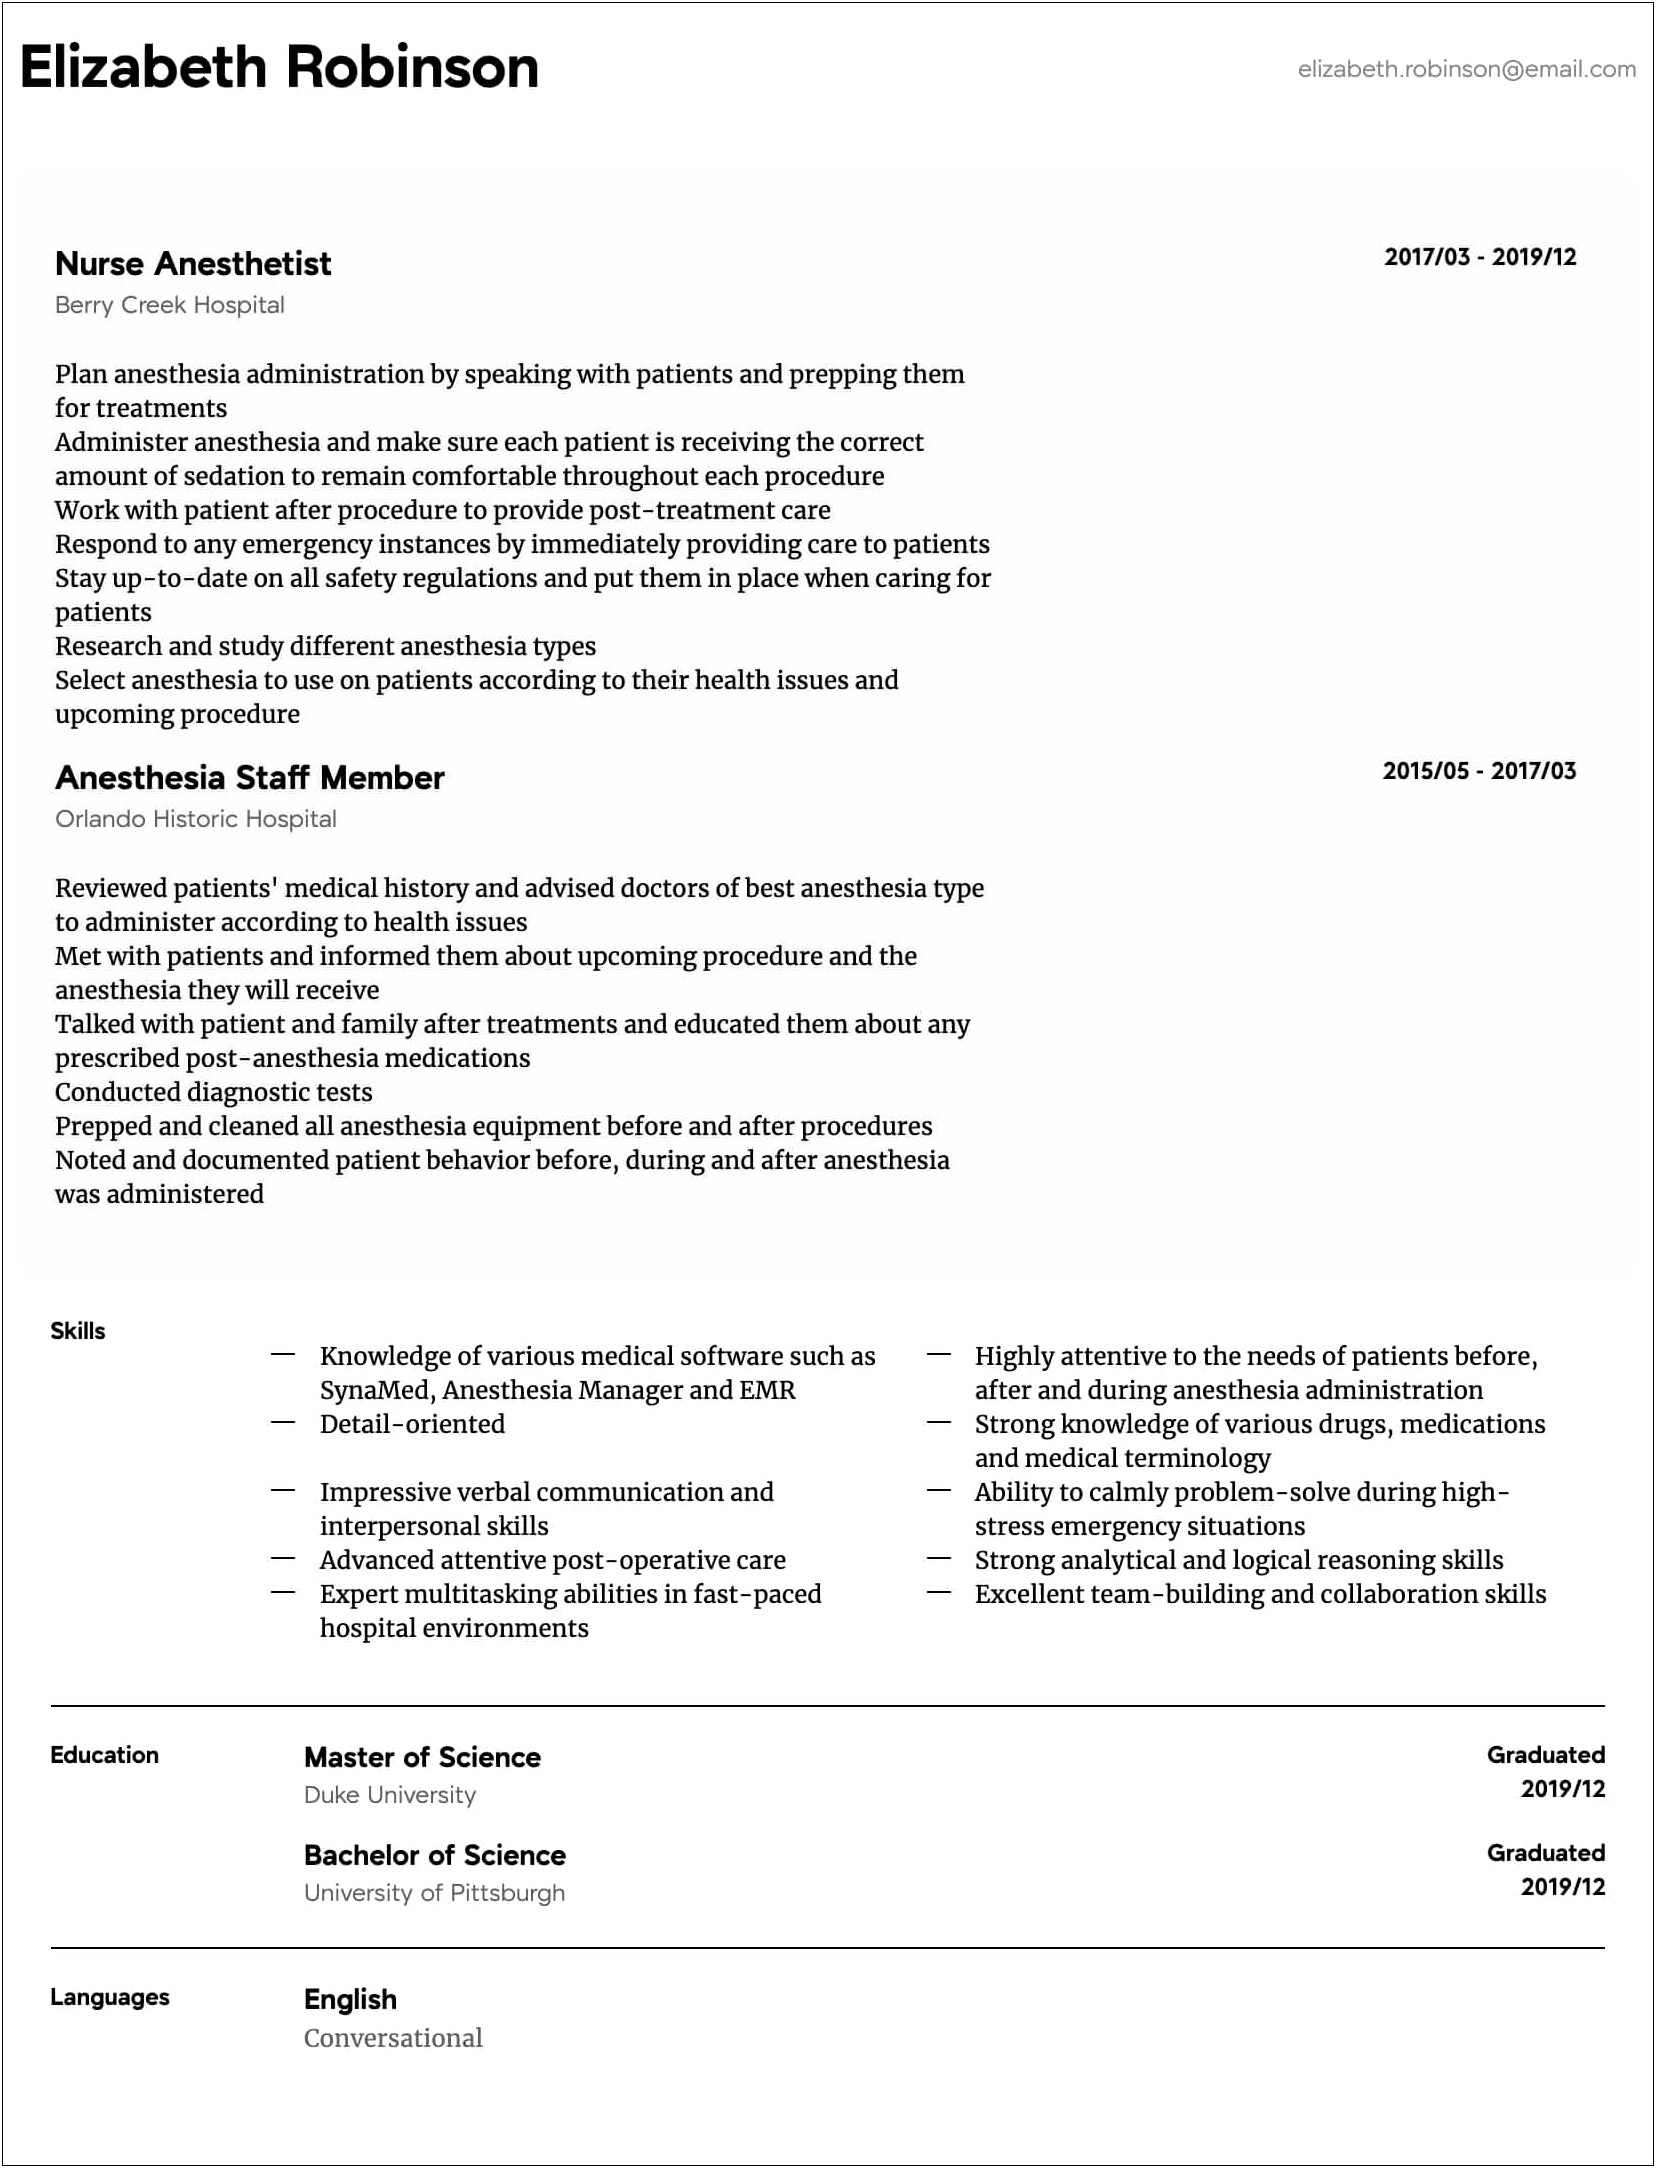 Good Resume Objective For Assistant Nurse Manager